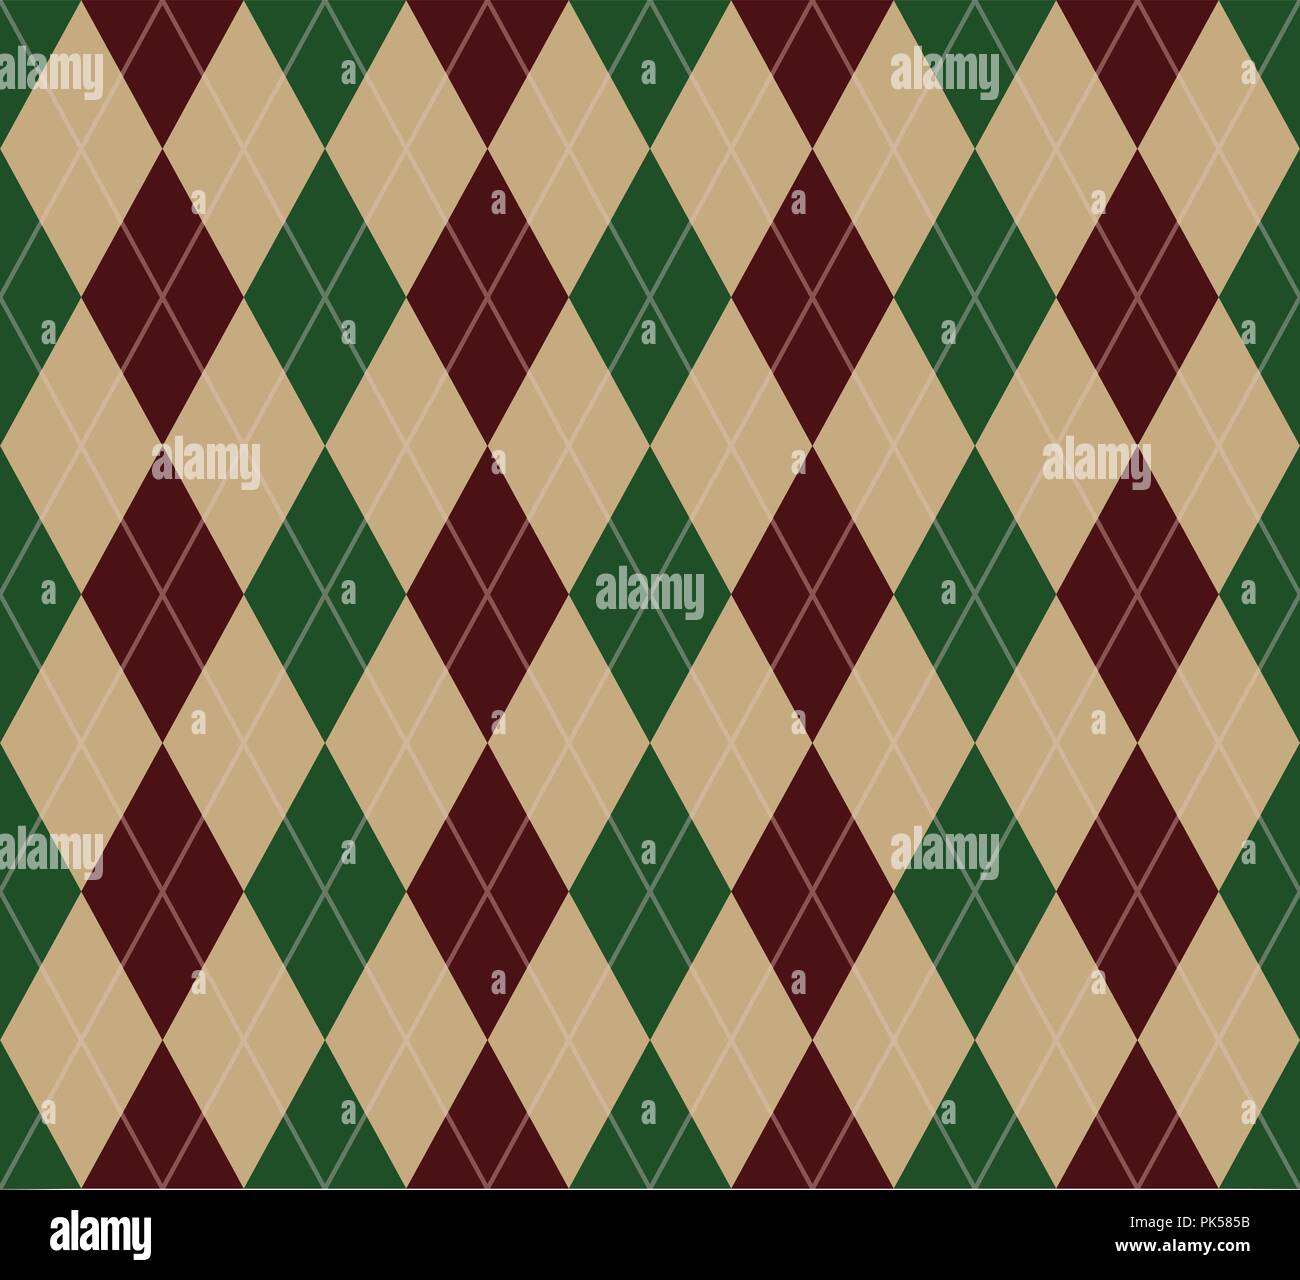 Seamless Christmas Argyle pattern dark green and red Stock Vector